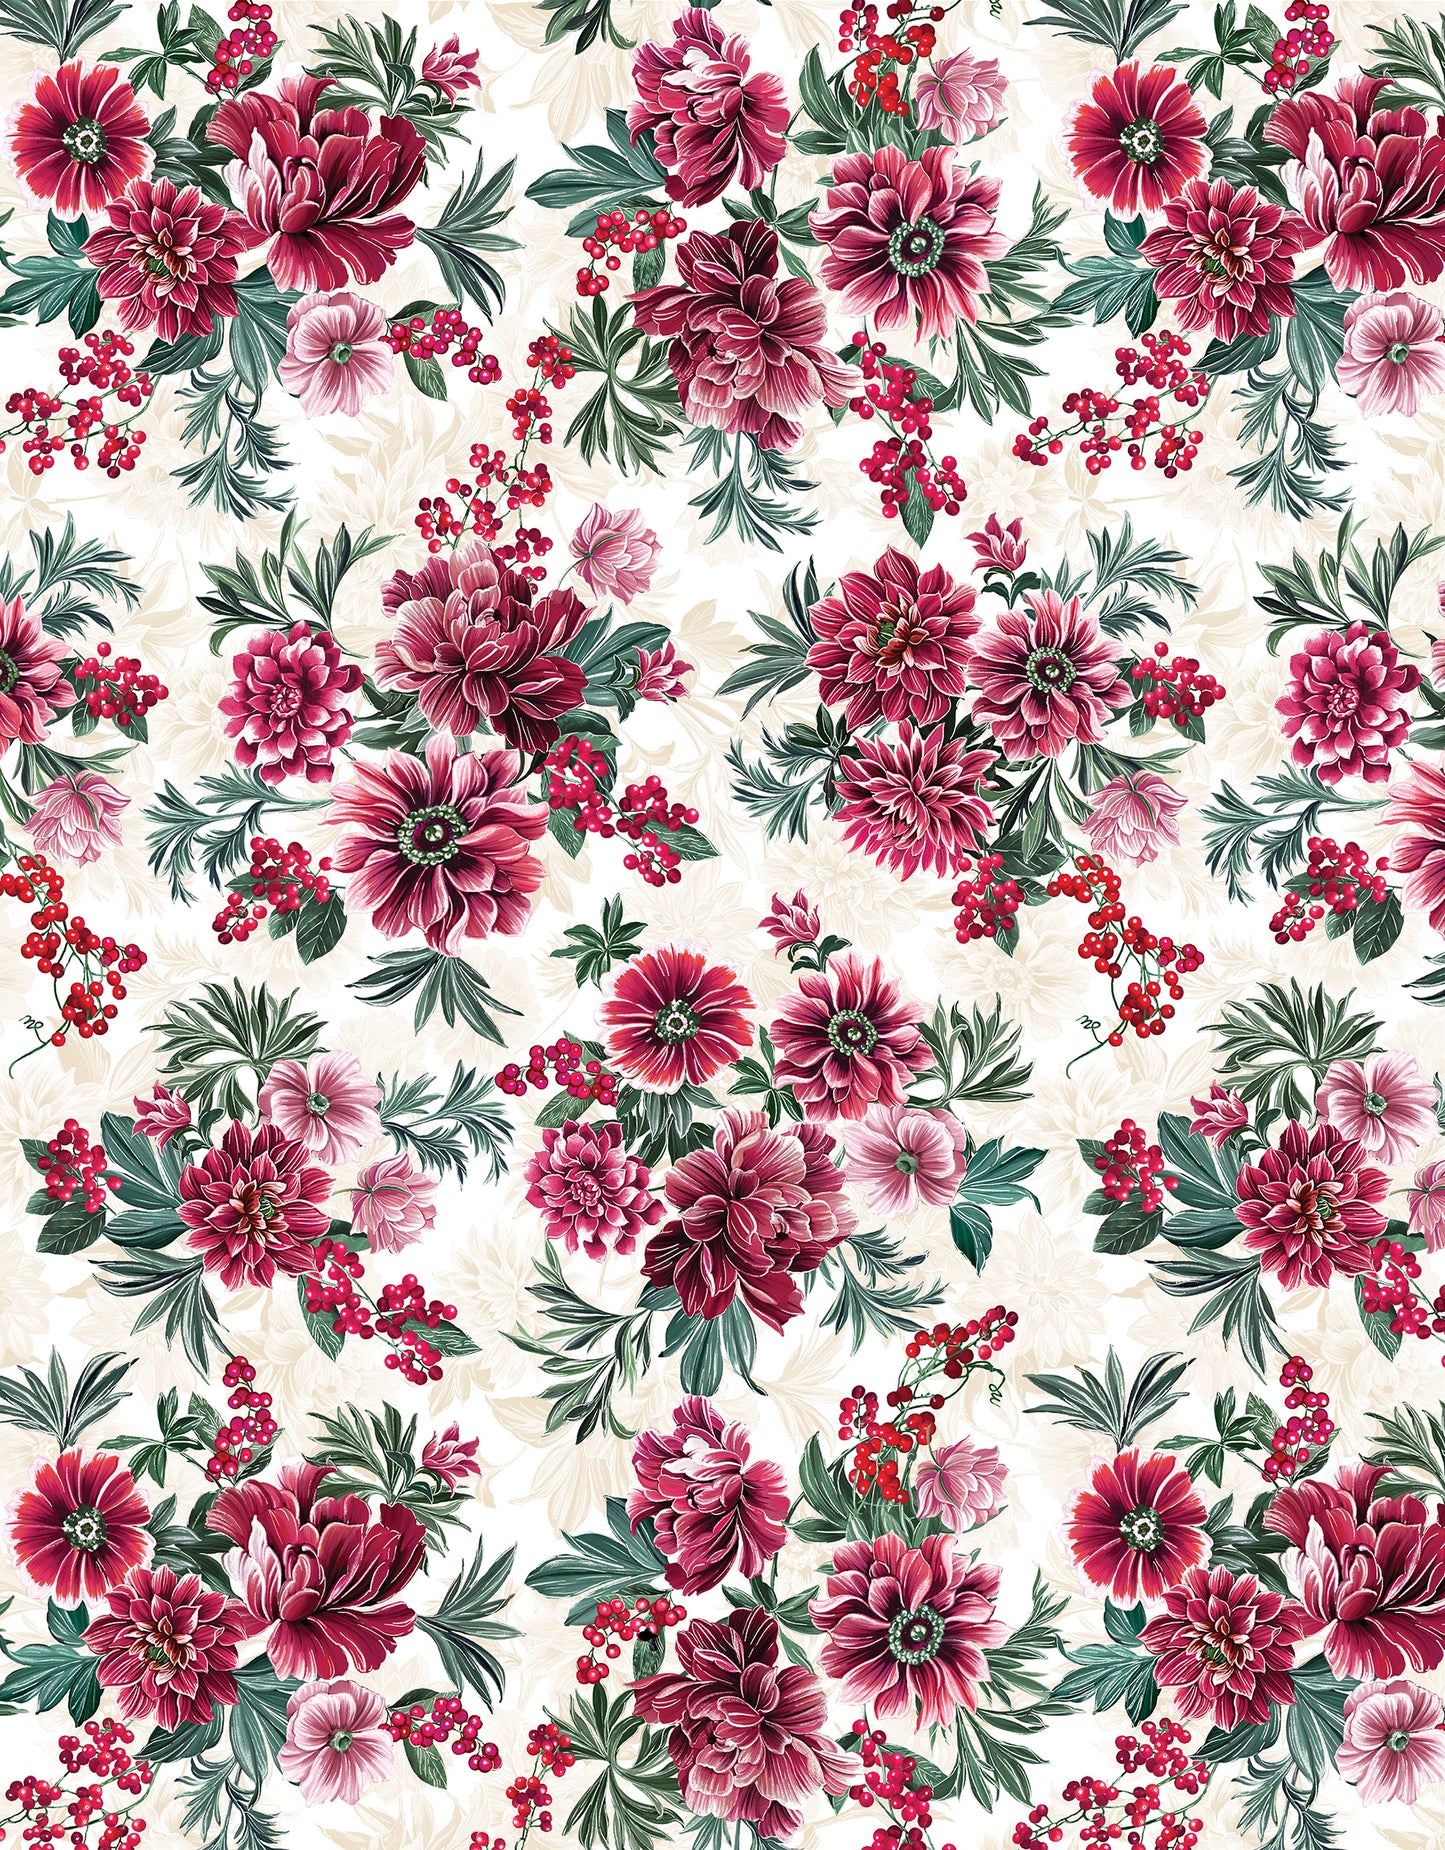 Winterberry Floral STRIP-PIES pre-cut 2.5 inch jelly roll stripes